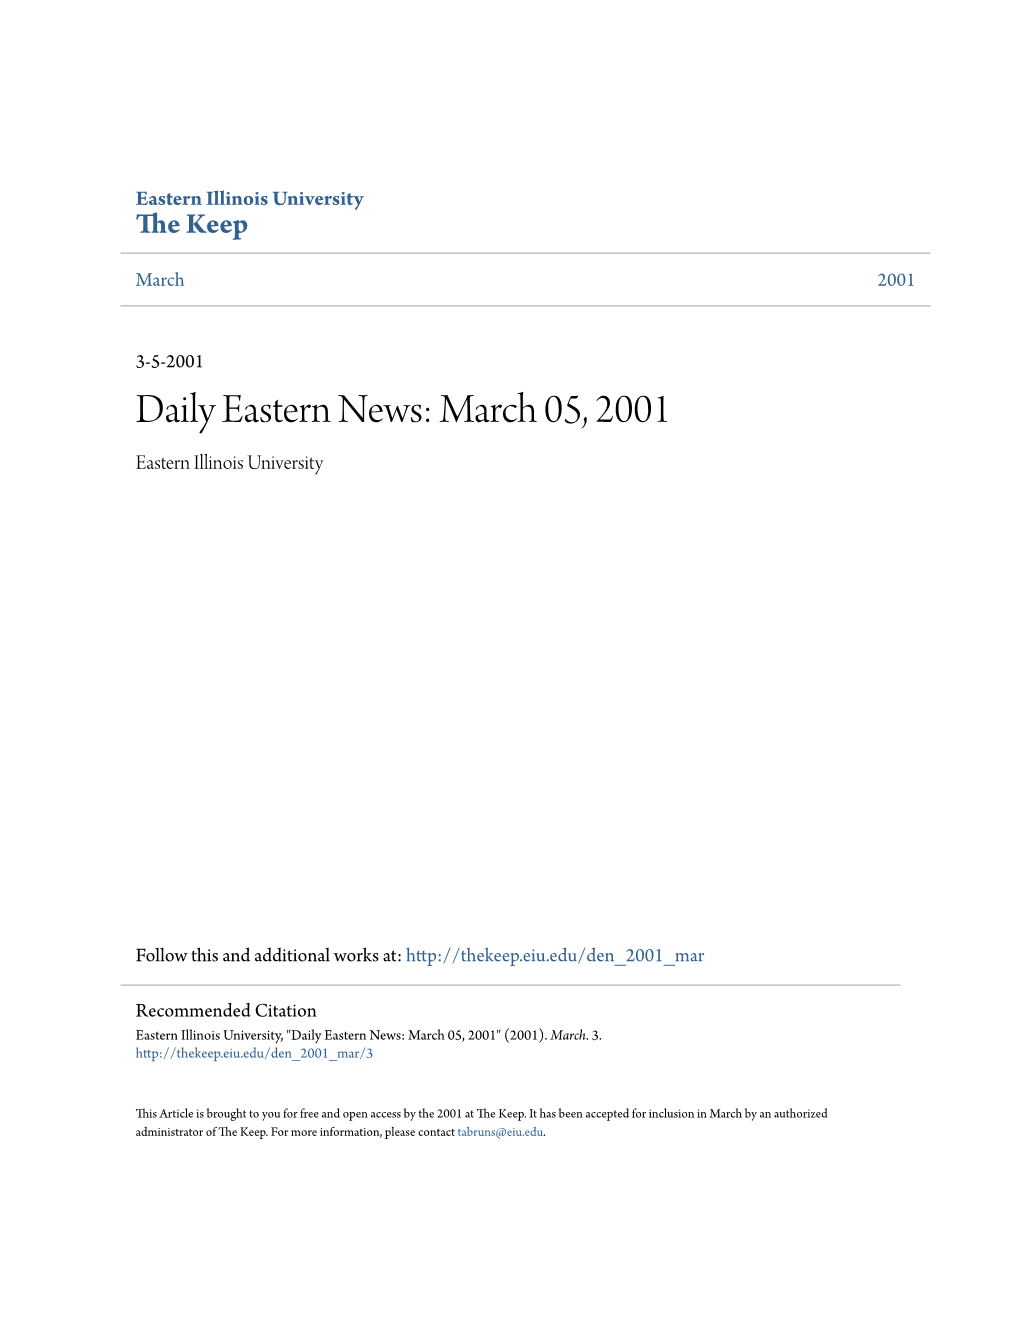 Daily Eastern News: March 05, 2001 Eastern Illinois University